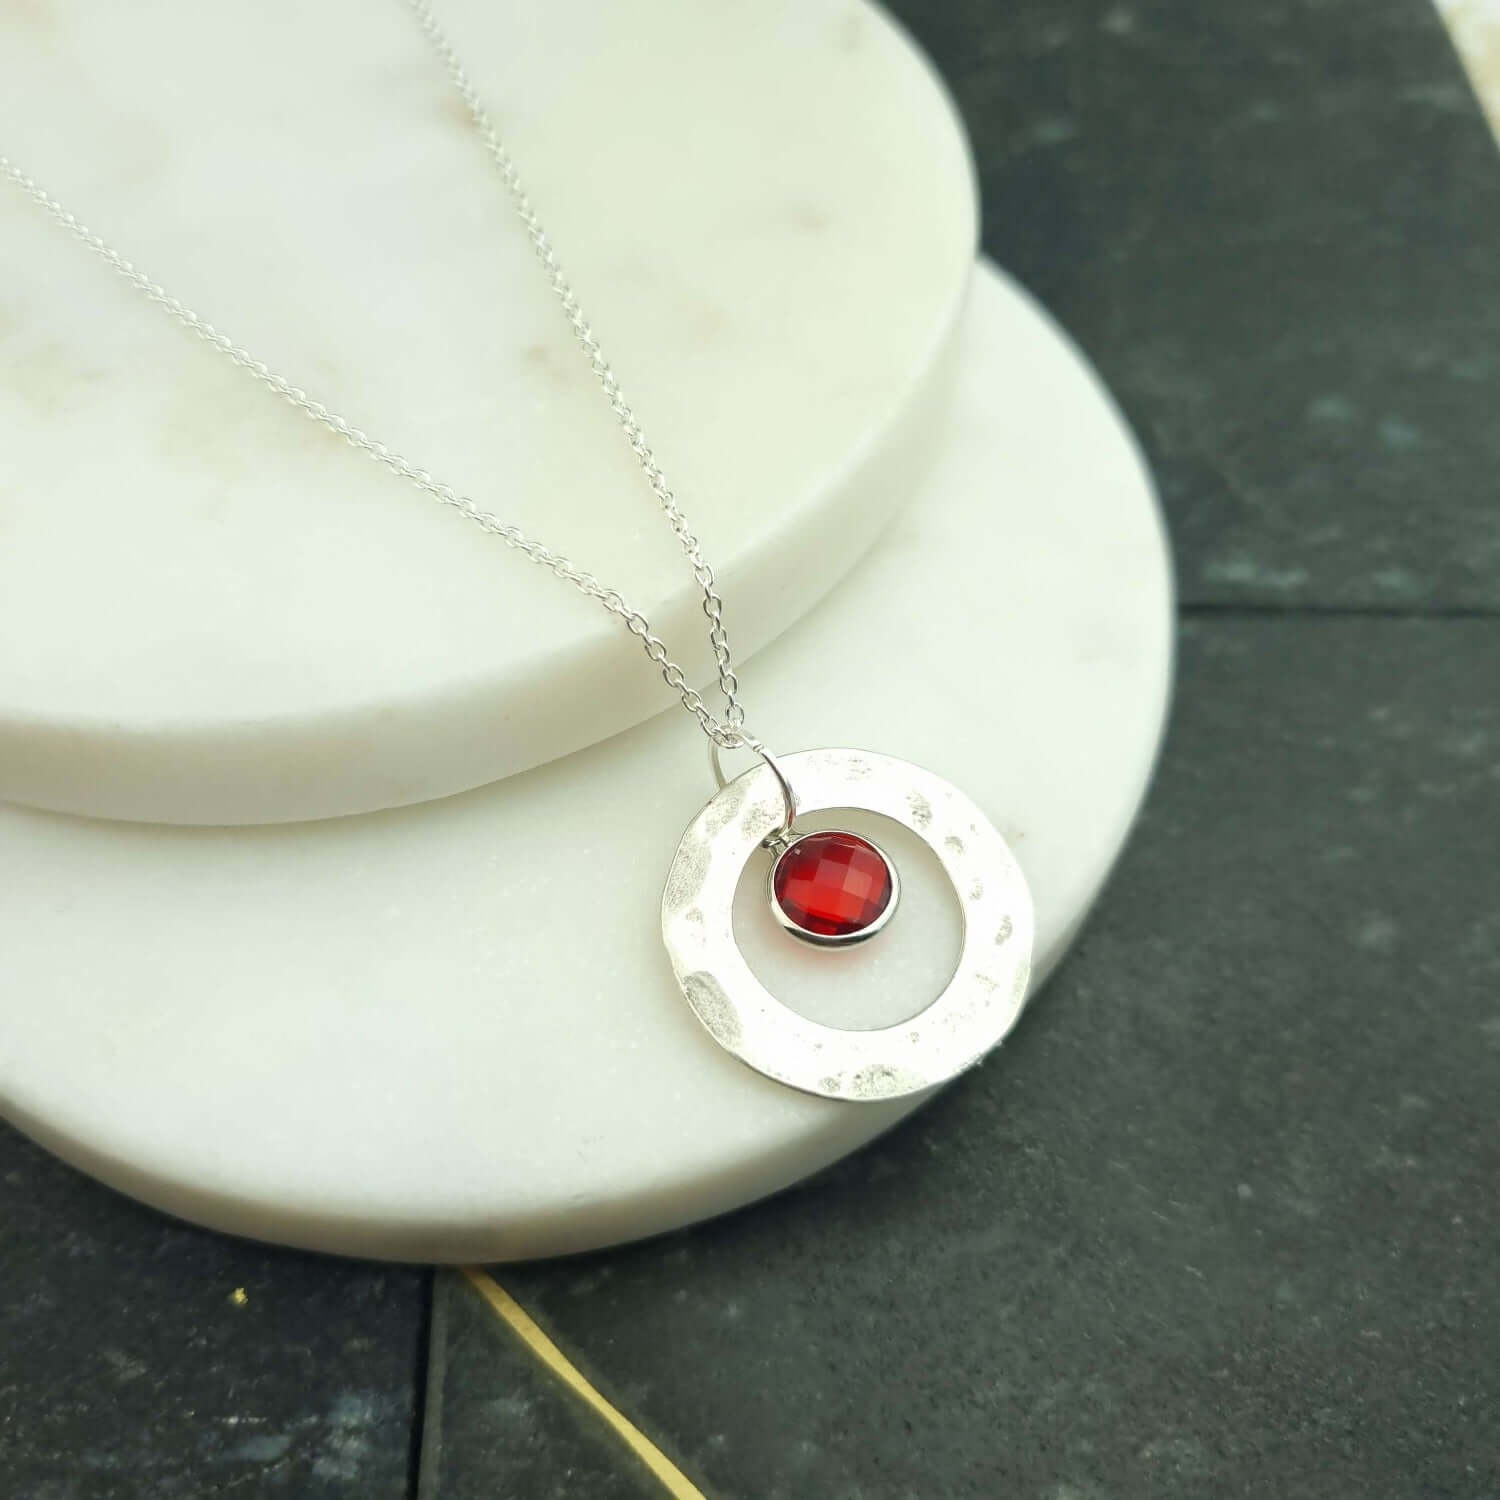 Birthstone sterling silver necklace